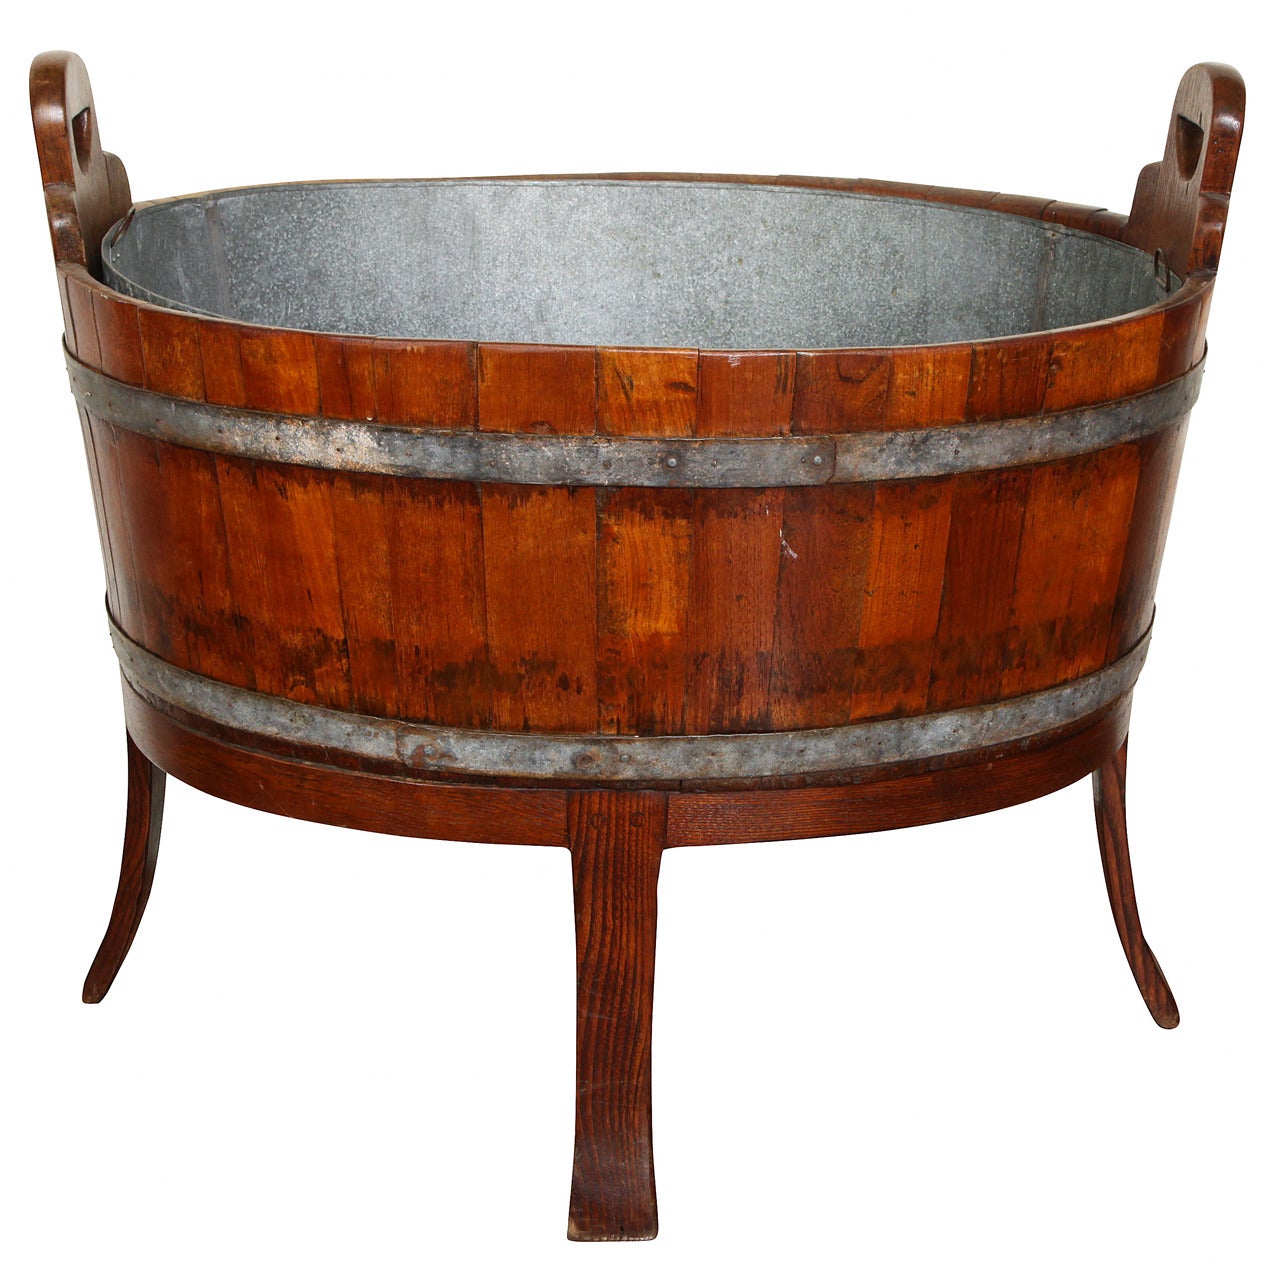 19th Century English Barrel Constructed Wine Cooler